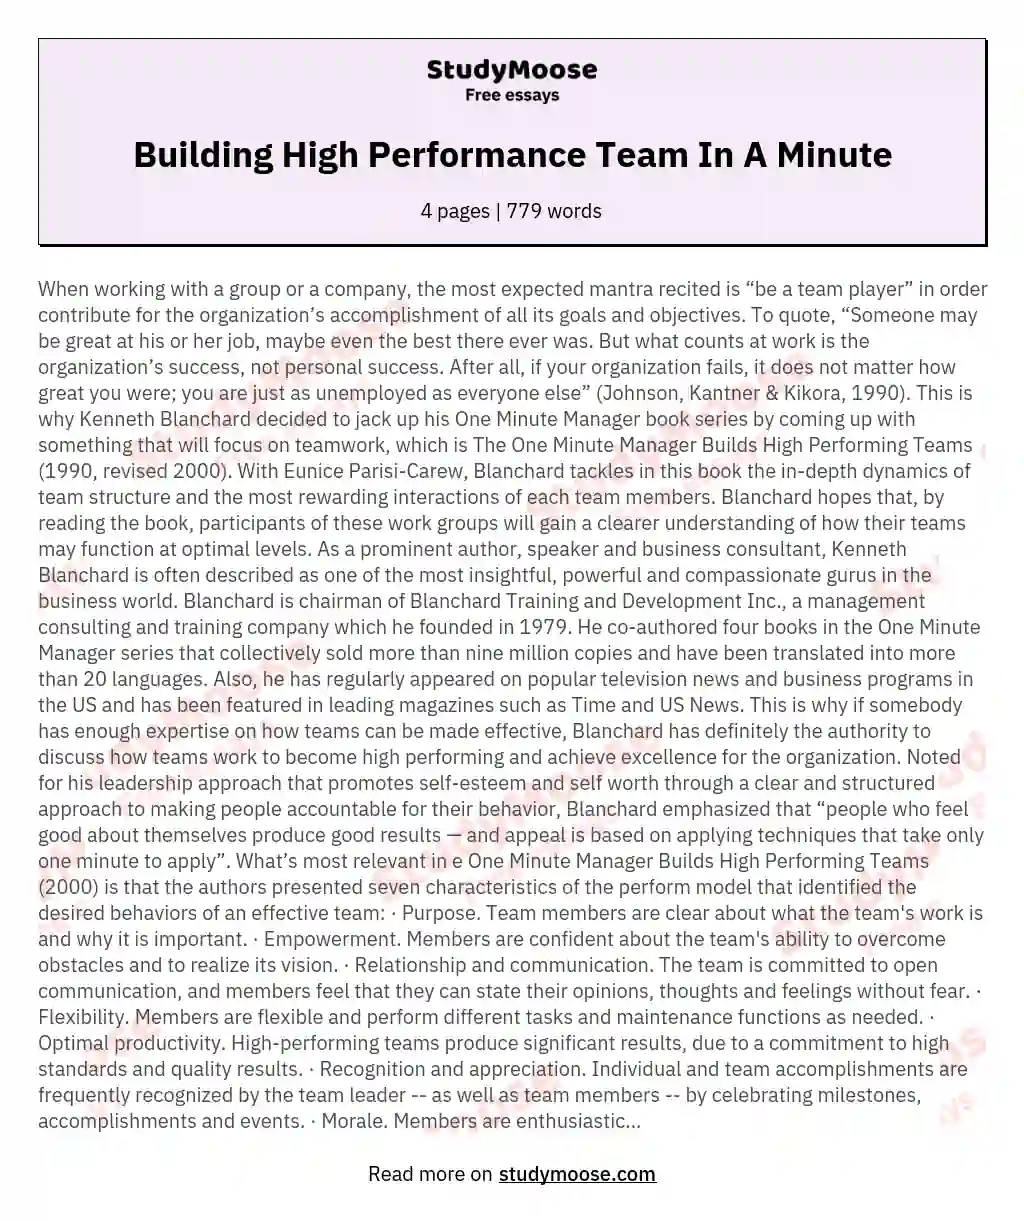 Building High Performance Team In A Minute essay